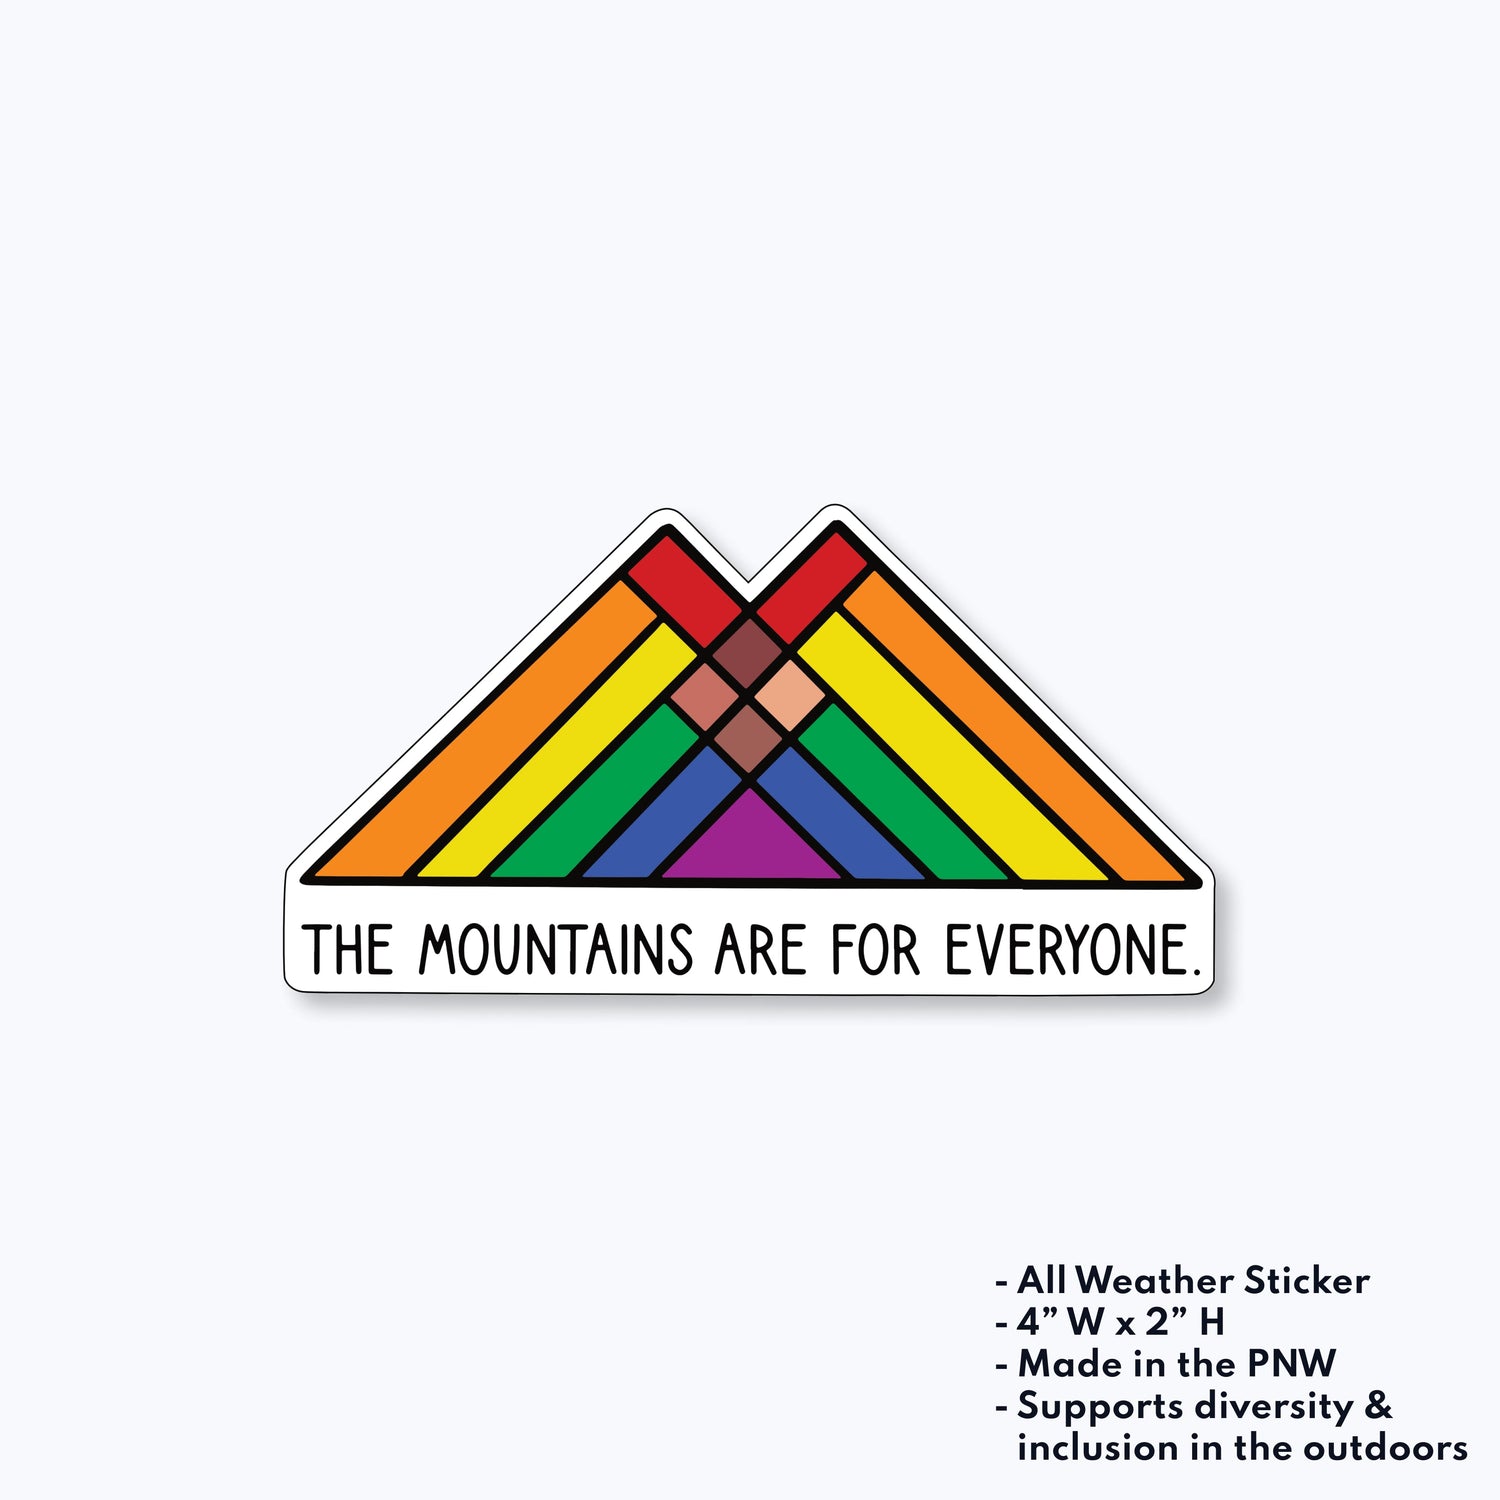 The Mountains are for everyone